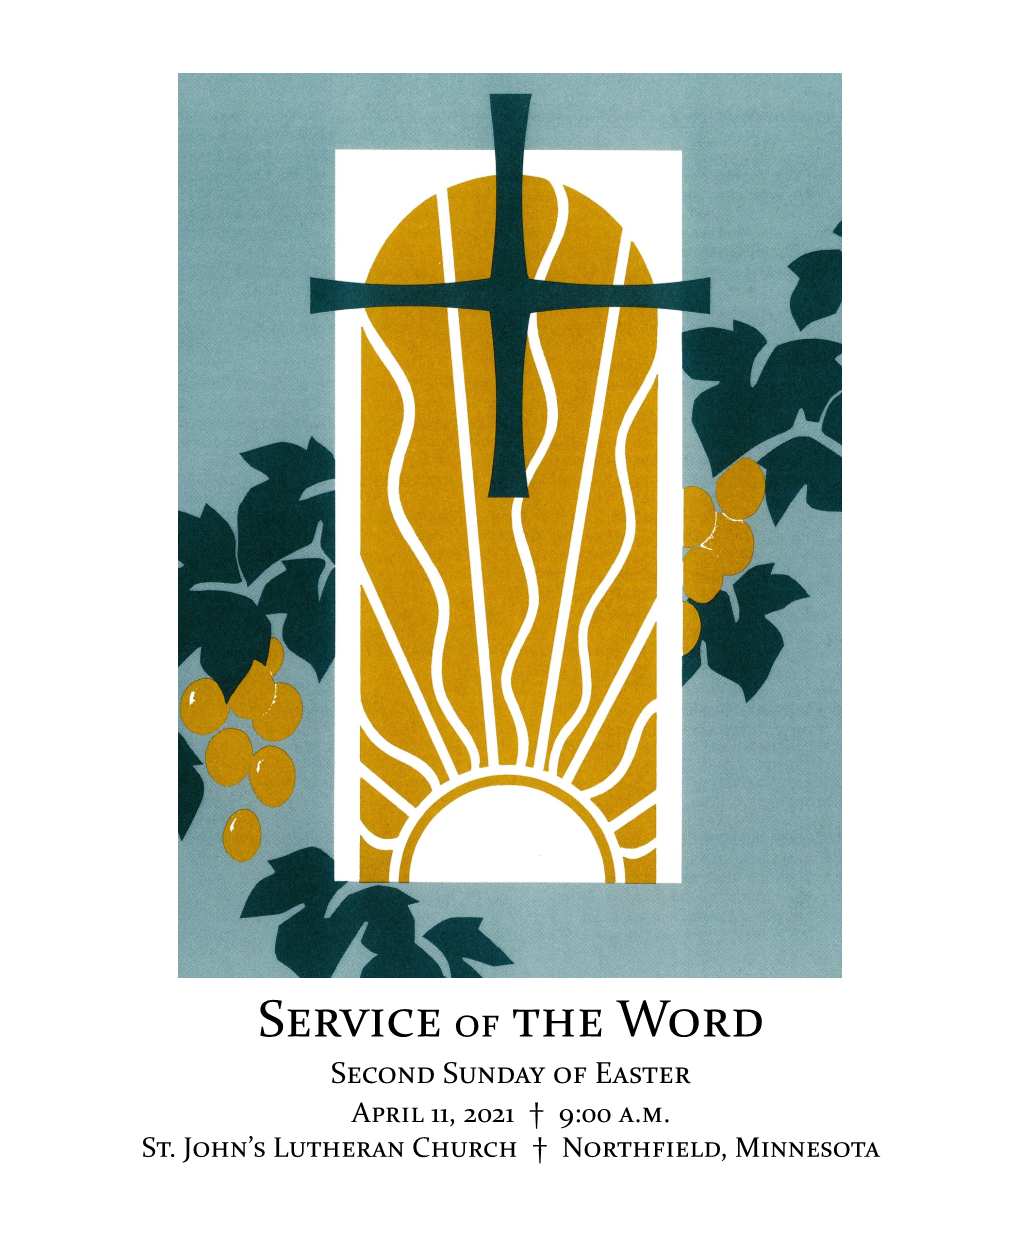 Service of the Word Second Sunday of Easter April 11, 2021 † 9:00 A.M